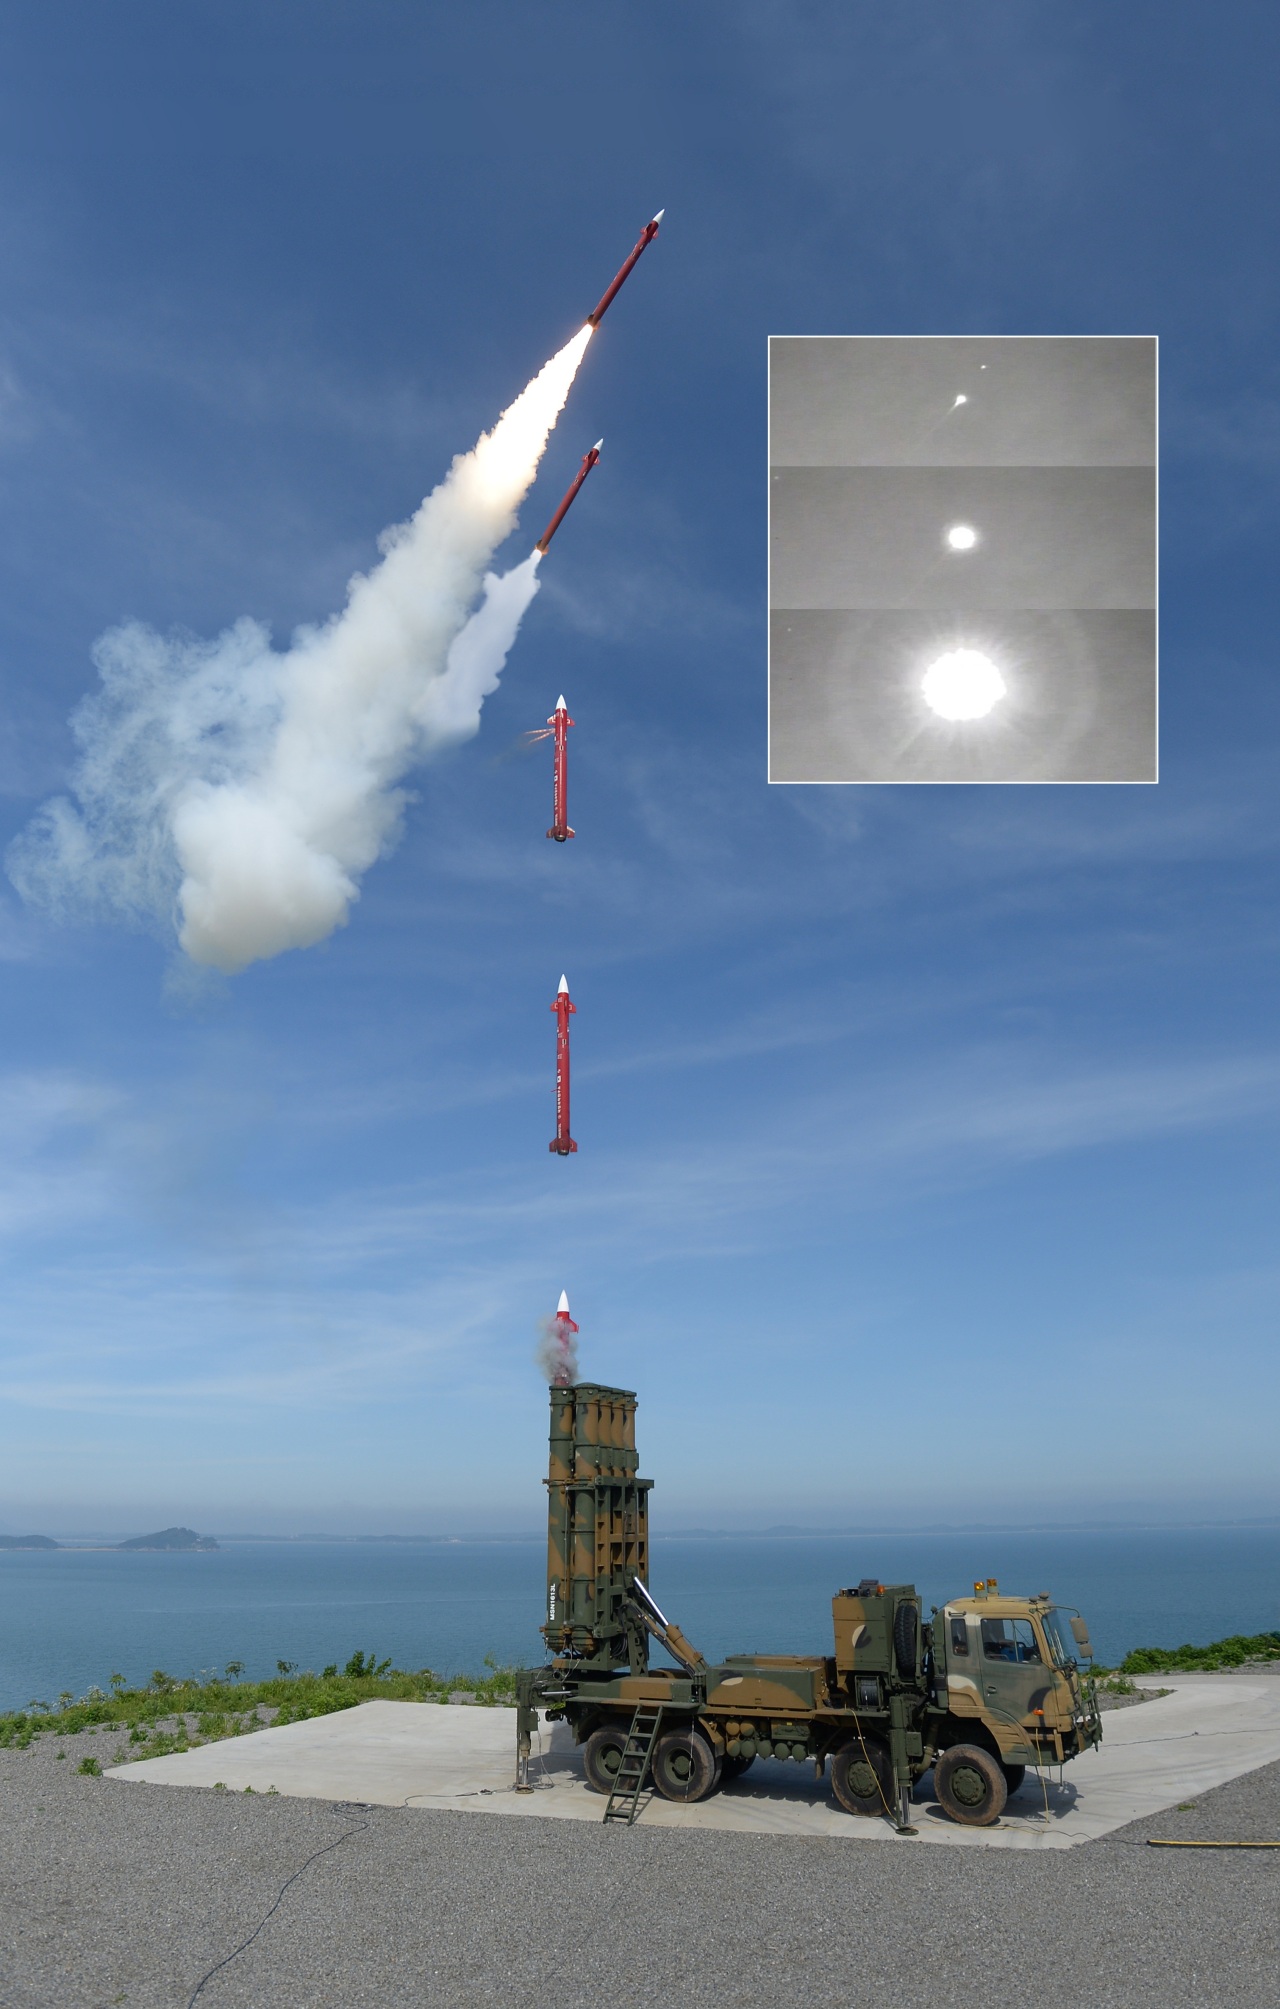 This undated photo, provided by the arms procurement agency on Thursday, shows Cheongung II, the upgraded version of the country's first indigenously developed medium-range surface-to-air guided missile of the same name. (Arms Procurement Agency )